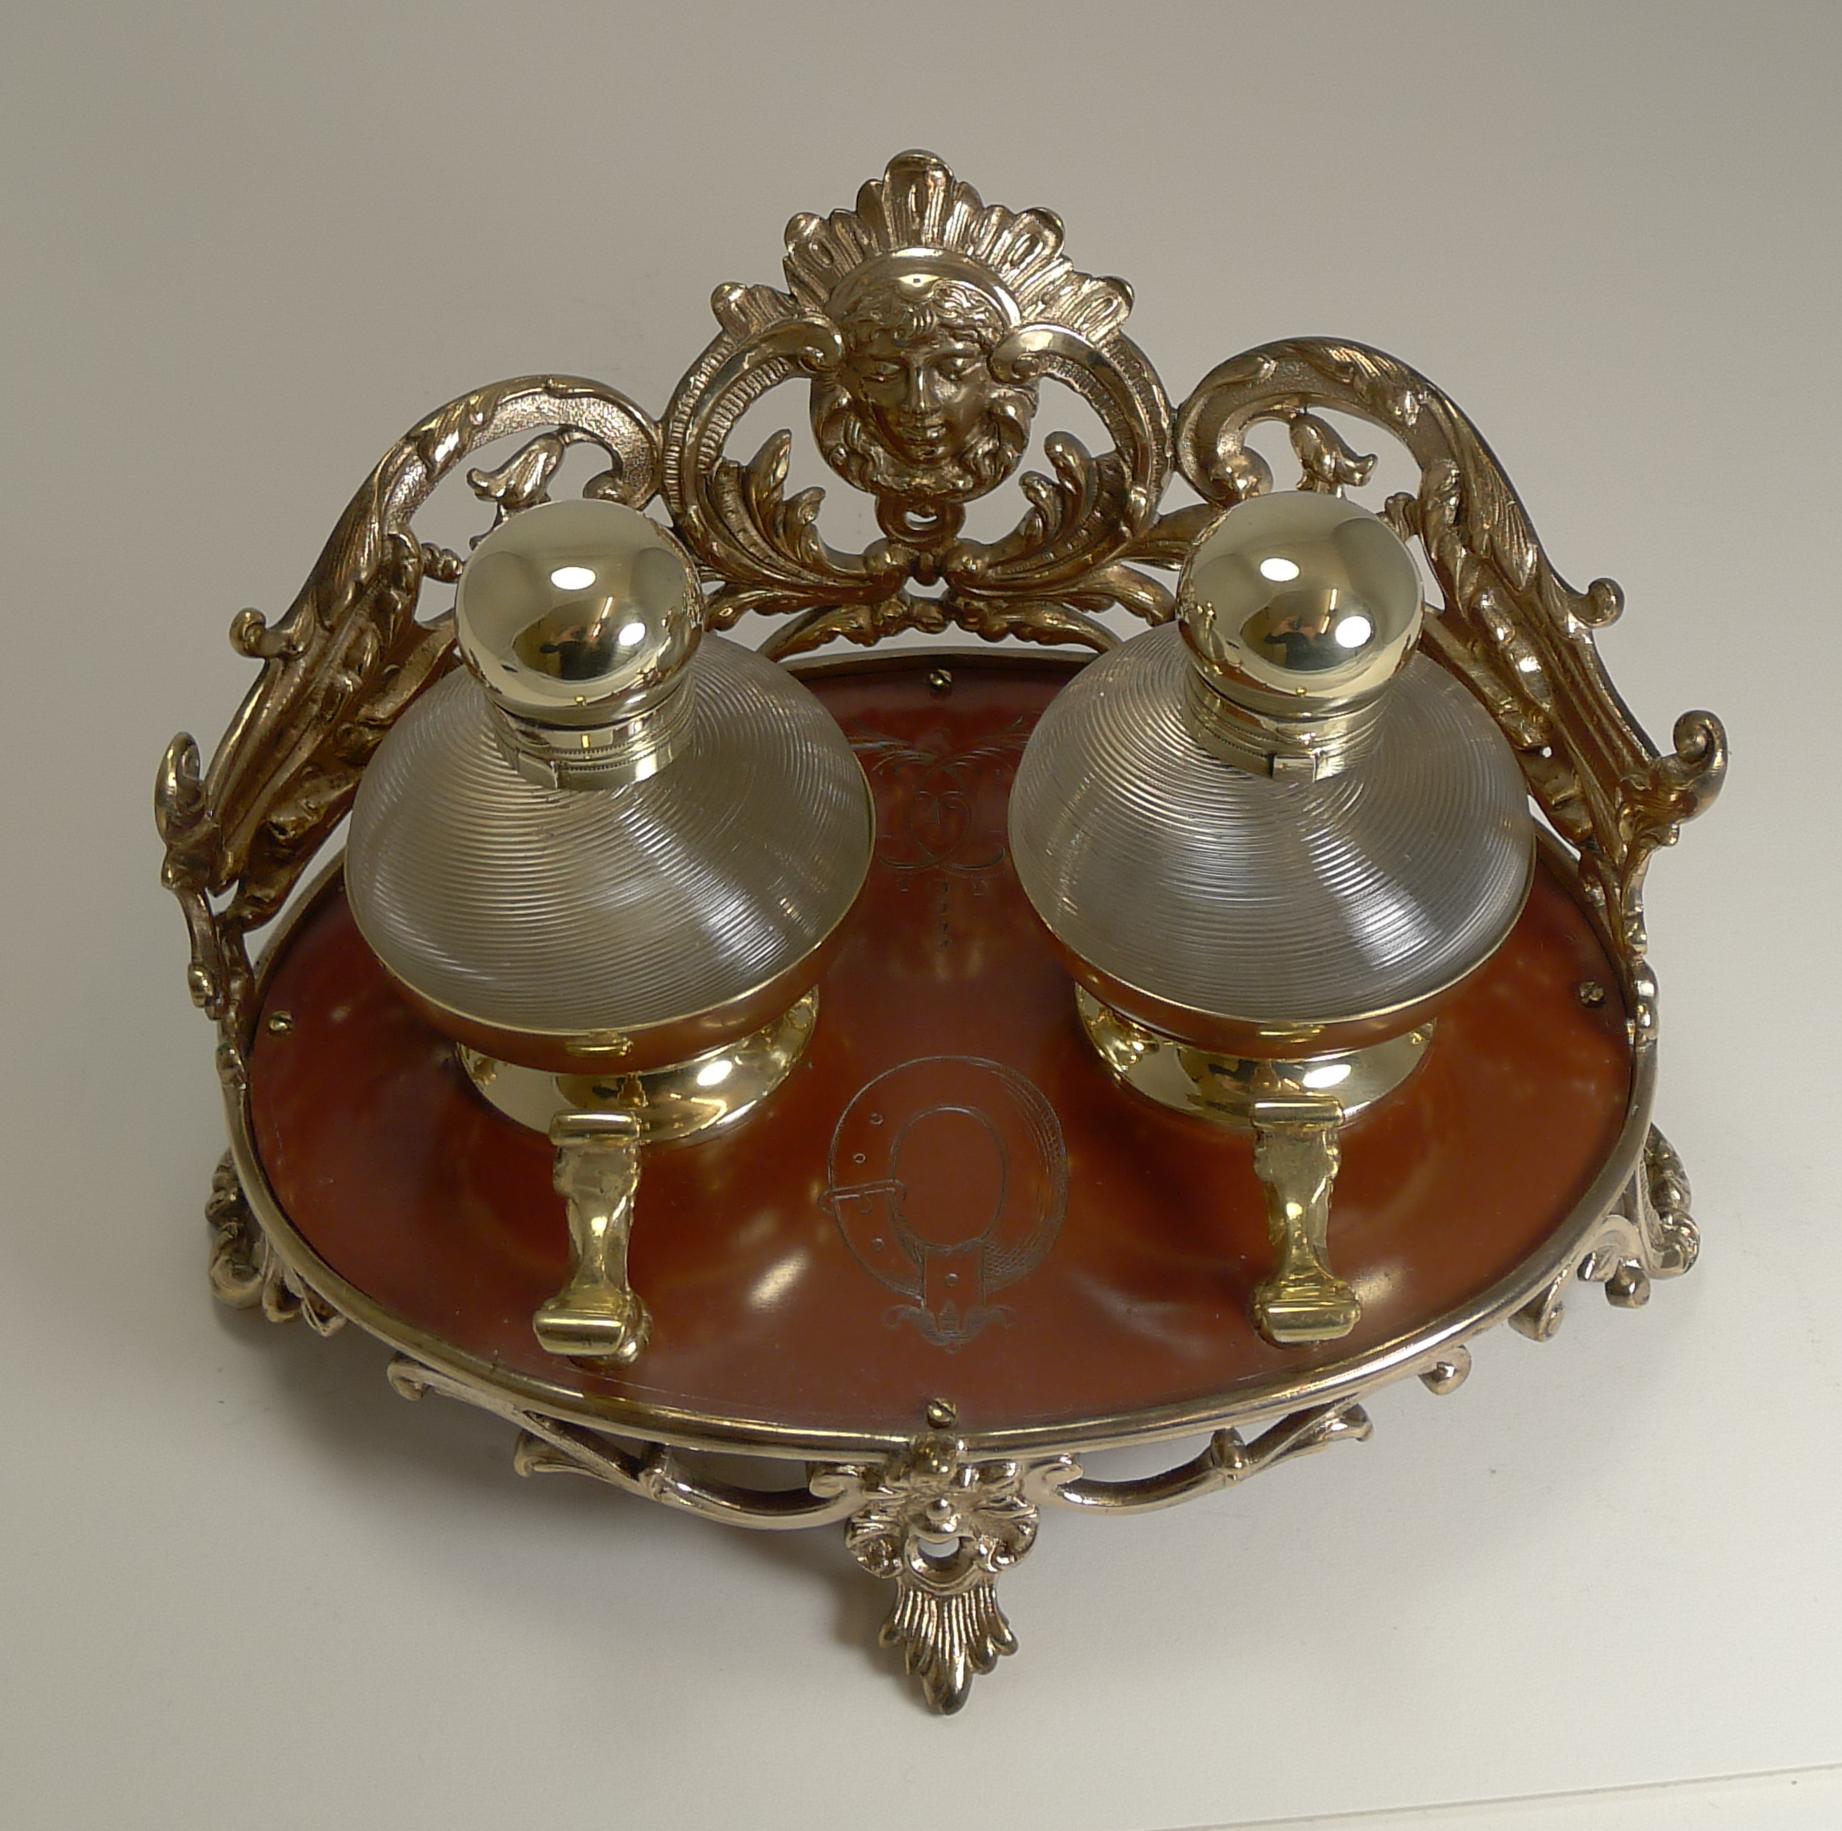 A truly unusual and quite spectacular Victorian inkstand made from cast polished bronze standing on cast reticulated feet. The gallery around the back is also pierced or reticulated featuring a mythical figure to the centre.

The base is enameled